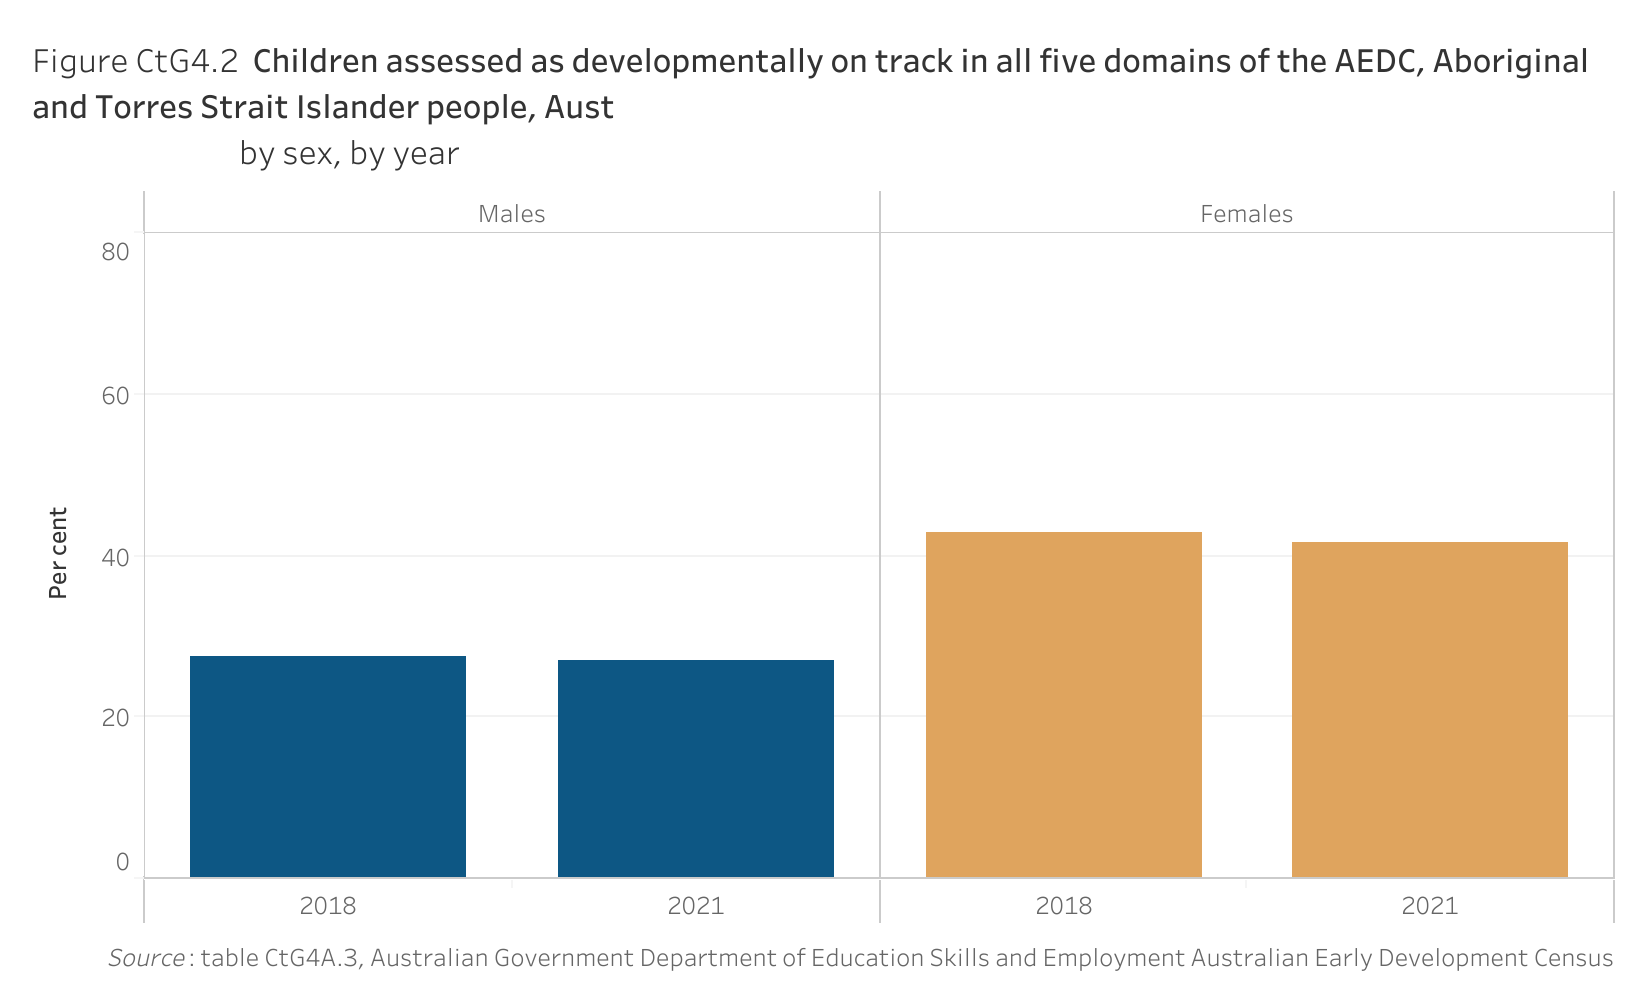 Figure CtG4.2 shows children assessed as developmentally on track in all five domains of the Australian Early Development Census, Aboriginal and Torres Strait Islander people, Australia, by sex, by year. More details can be found within the text near this image.